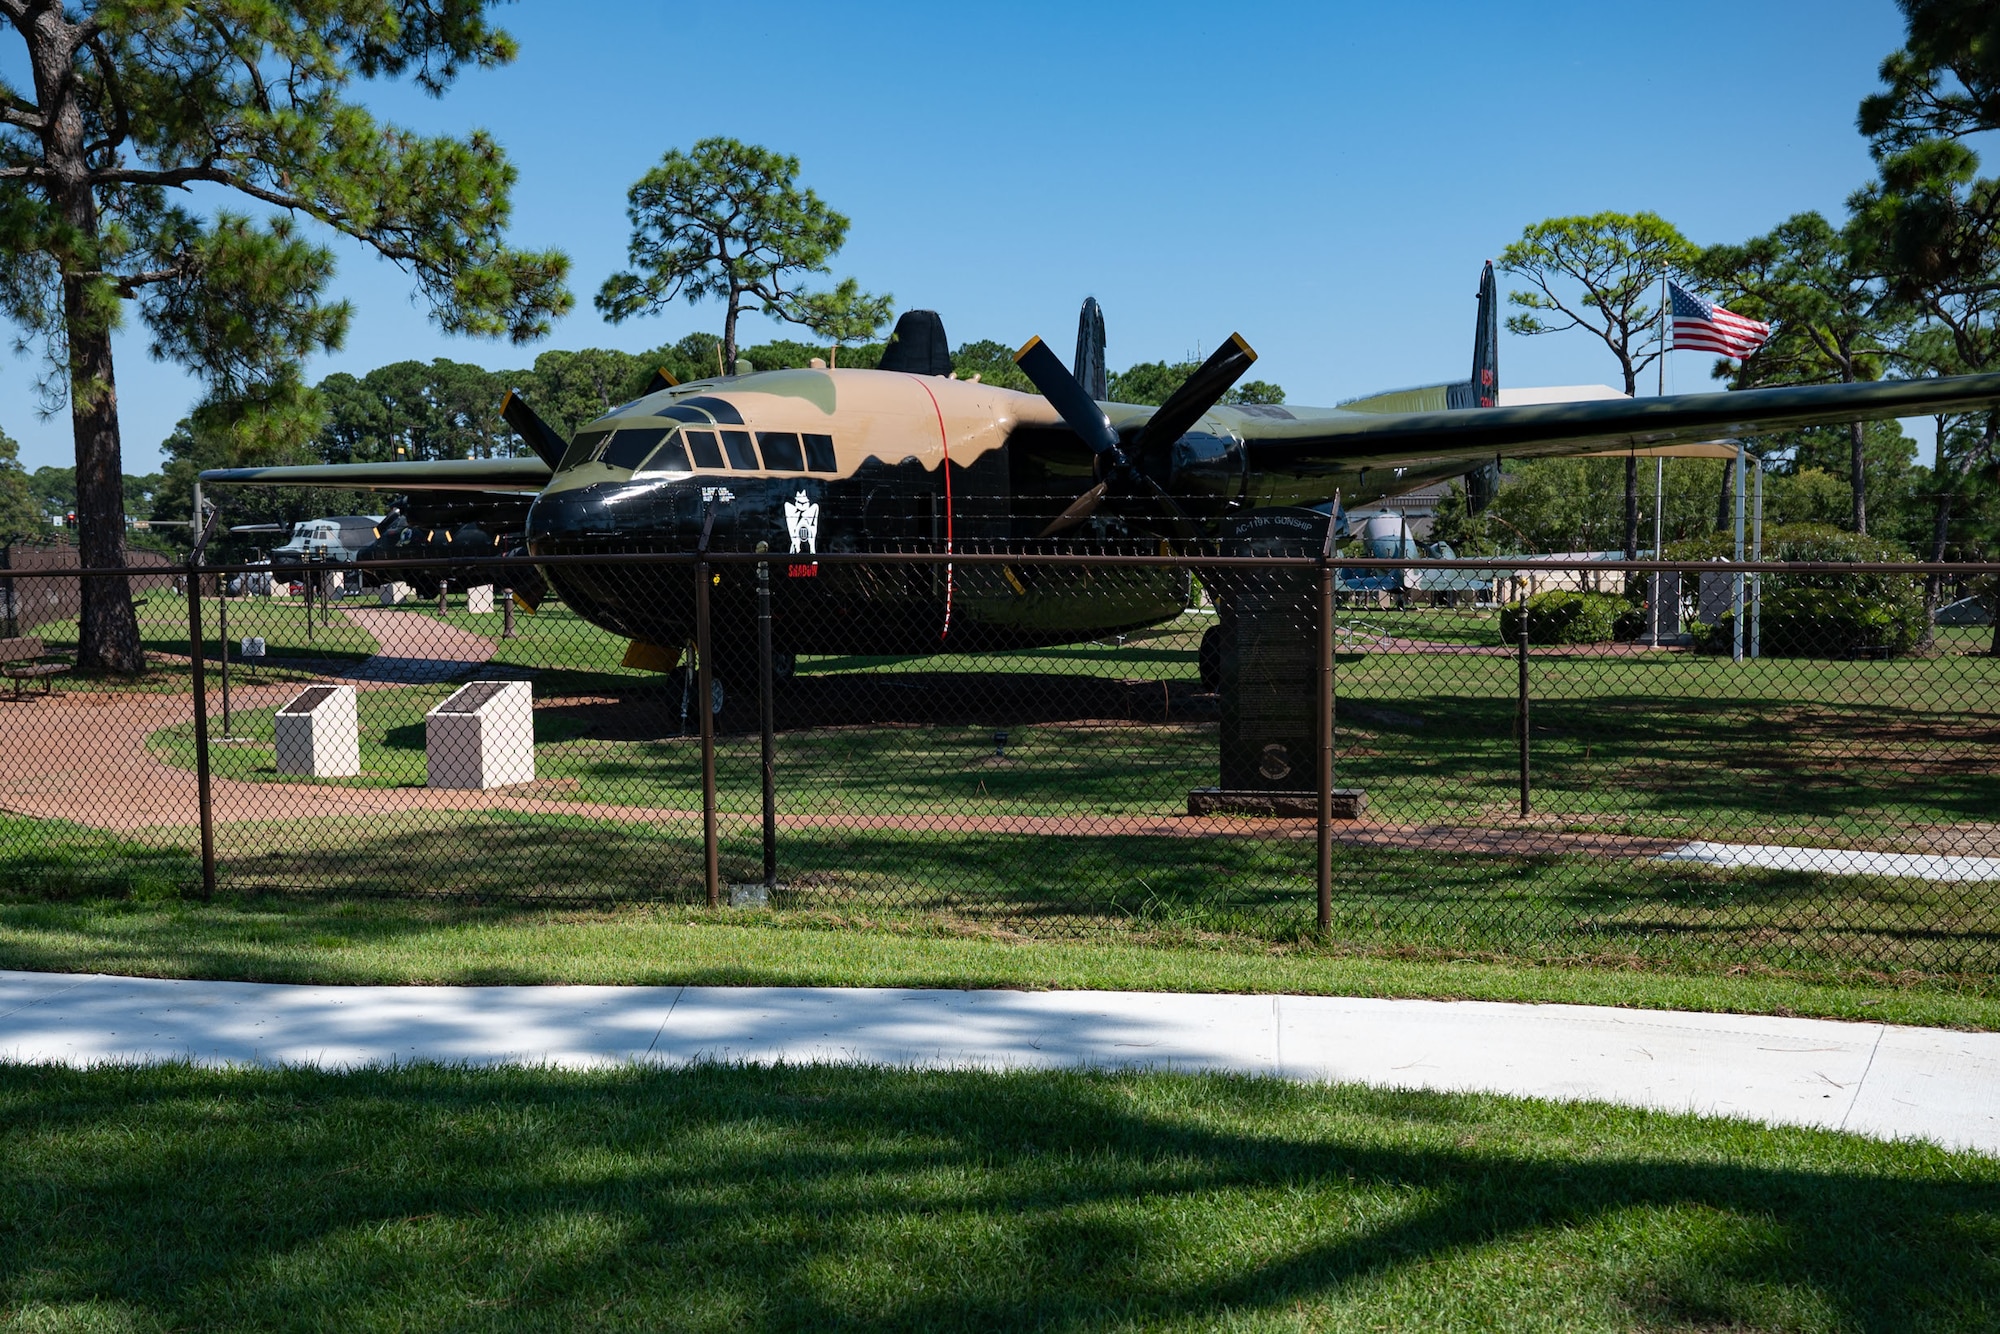 For the first time in more than 20 years, Hurlburt Field plans to open its airpark to the general public in spring 2024 - allowing visitors to see the aircraft first-hand and learn more about the history of Air Force Special Operations Command.